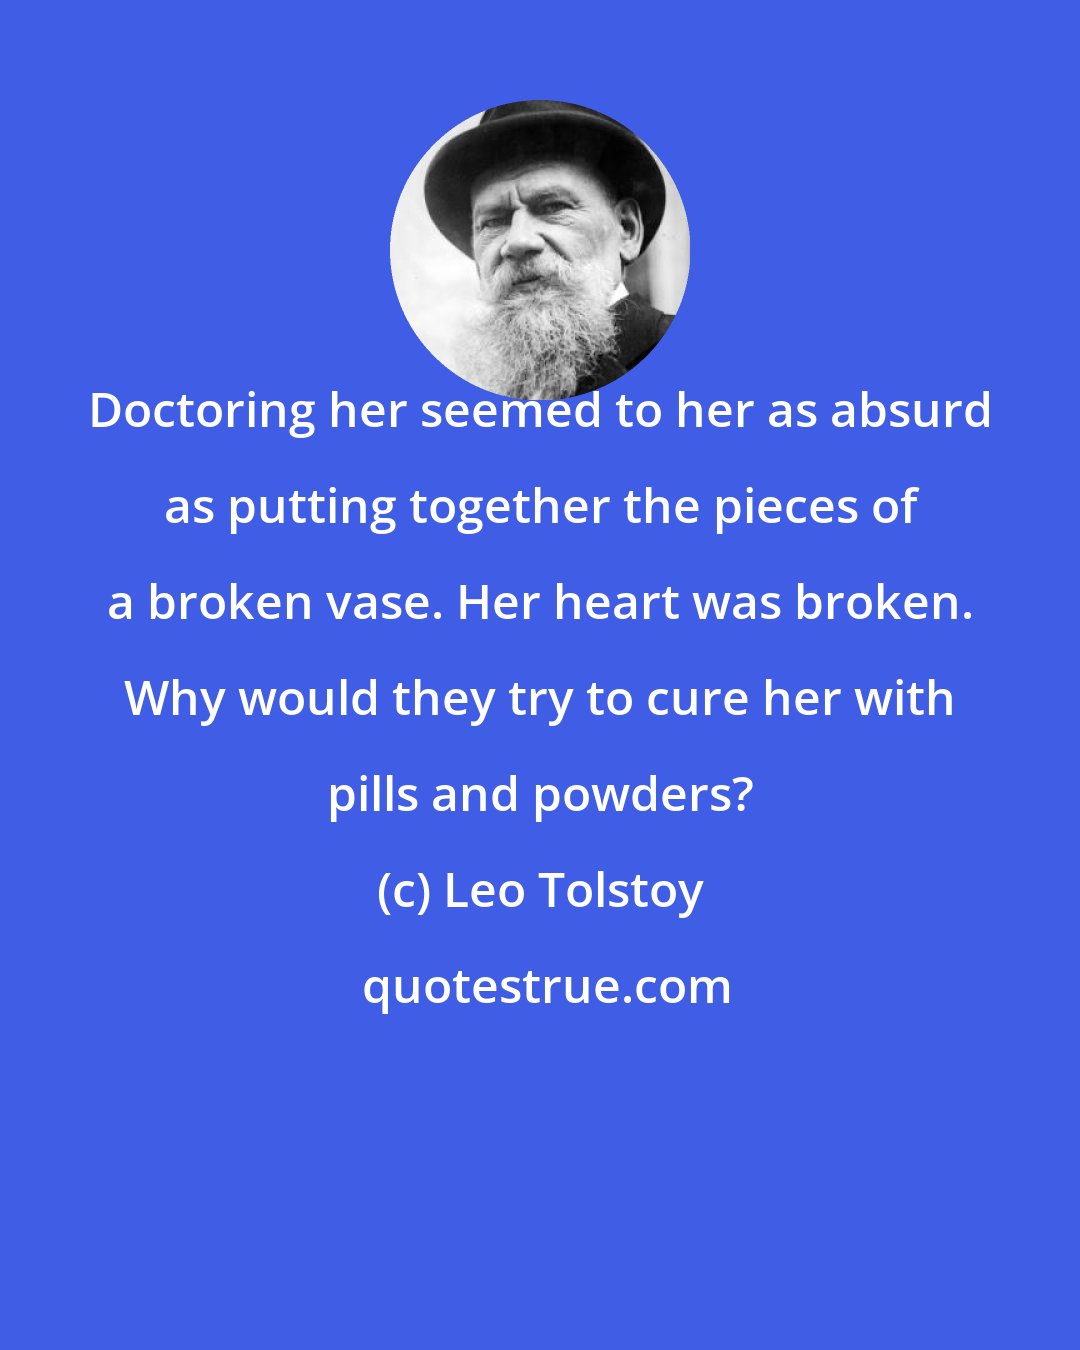 Leo Tolstoy: Doctoring her seemed to her as absurd as putting together the pieces of a broken vase. Her heart was broken. Why would they try to cure her with pills and powders?